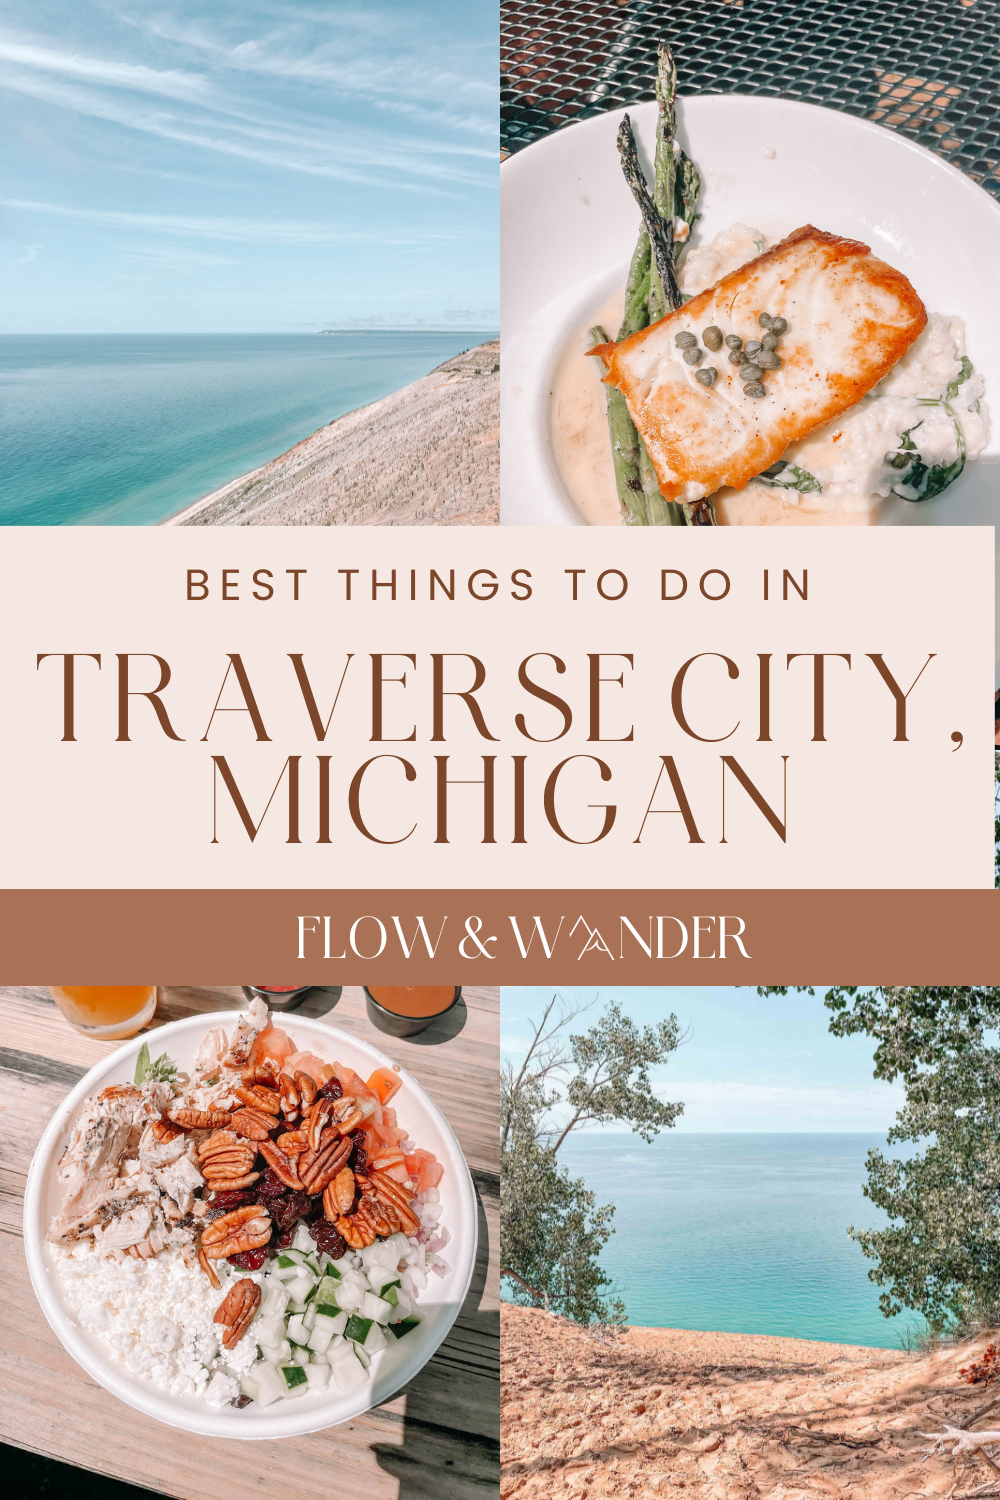 traverse-city-travel-guide-graphic3.png